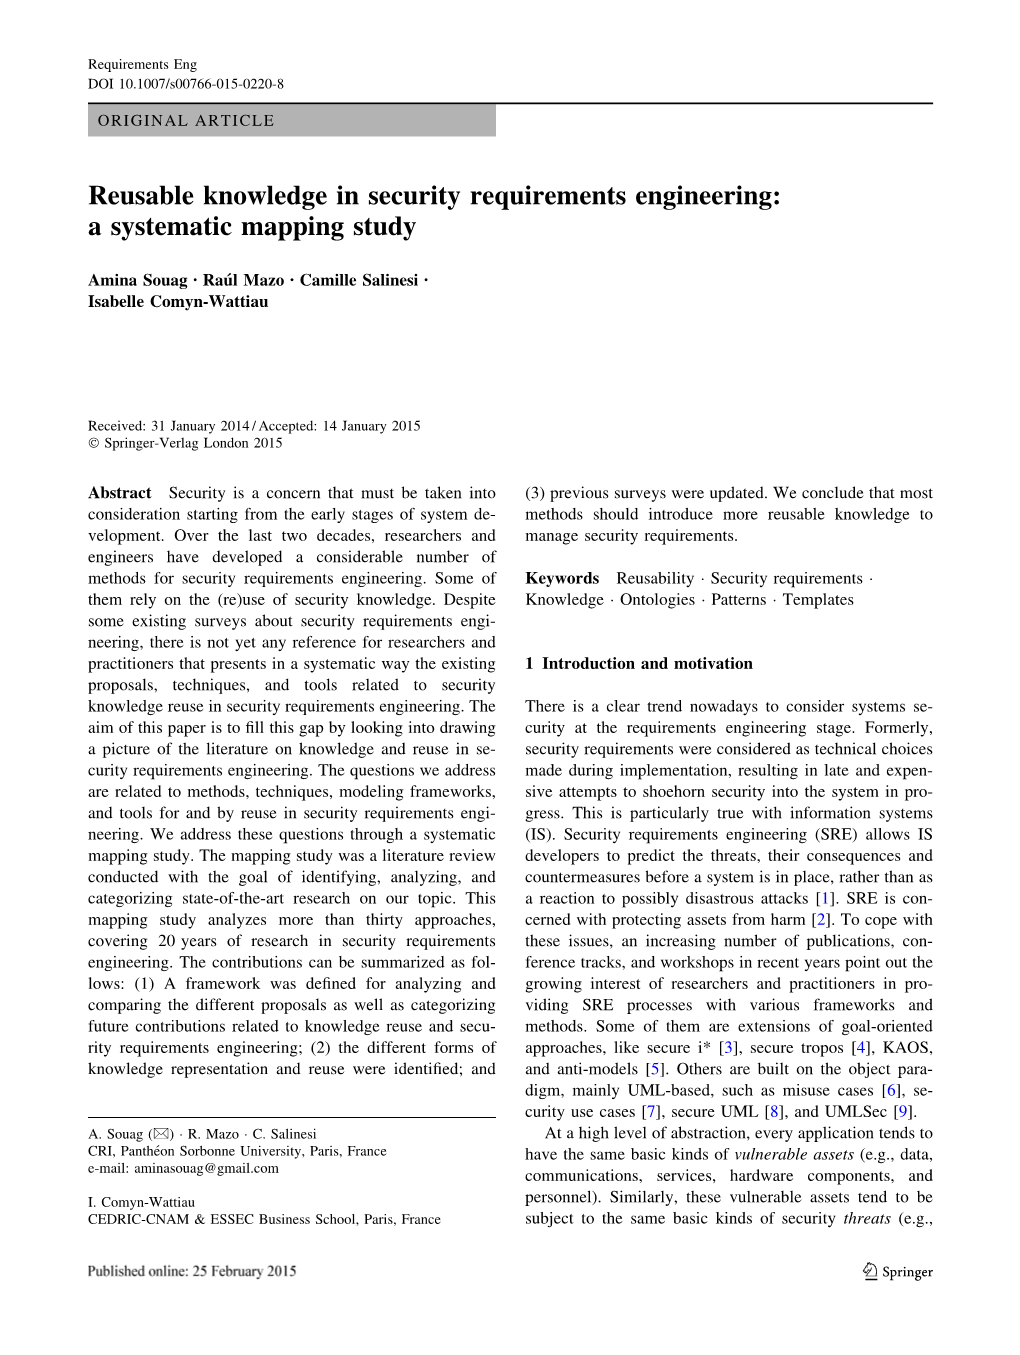 Reusable Knowledge in Security Requirements Engineering: a Systematic Mapping Study